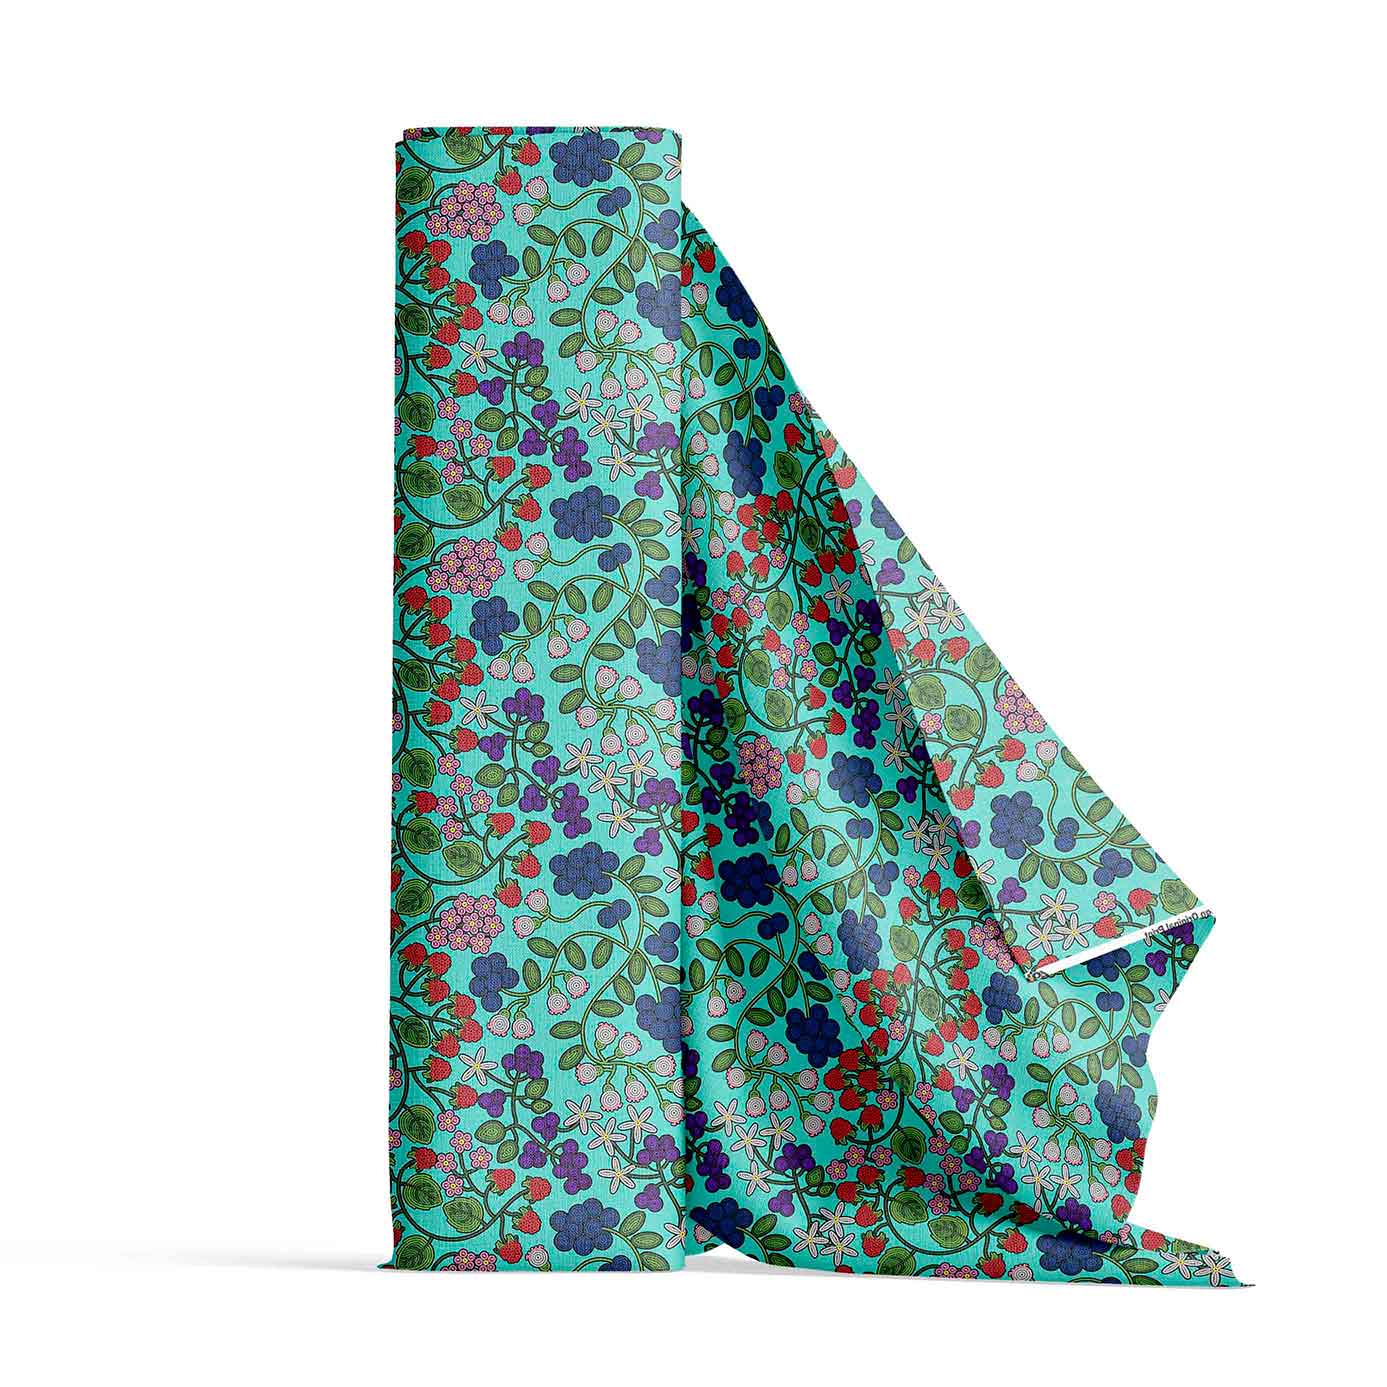 Takwakin Harvest Turquoise Satin Fabric By the Yard Pre Order